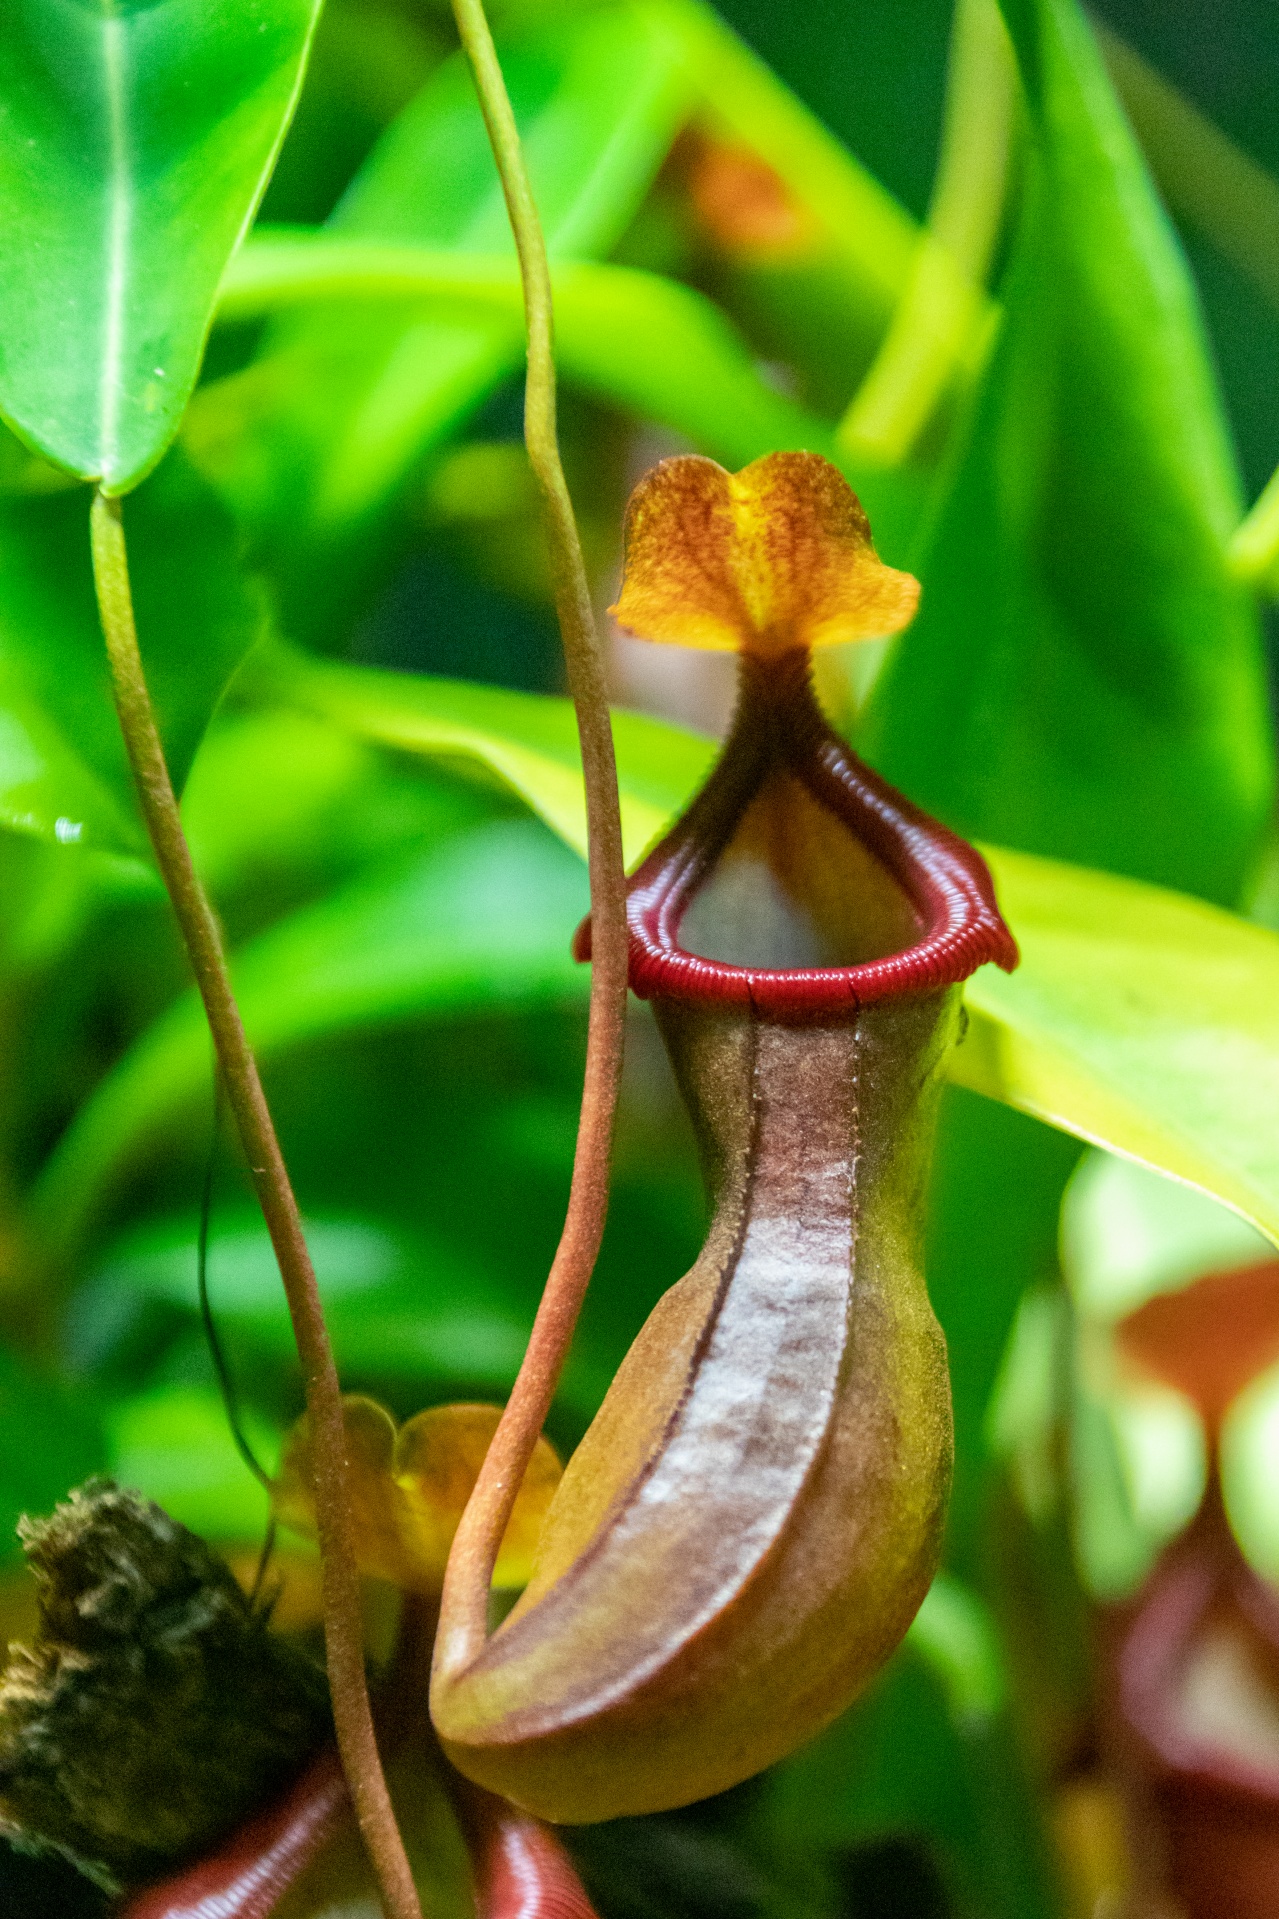 Insect eating pitcher plant